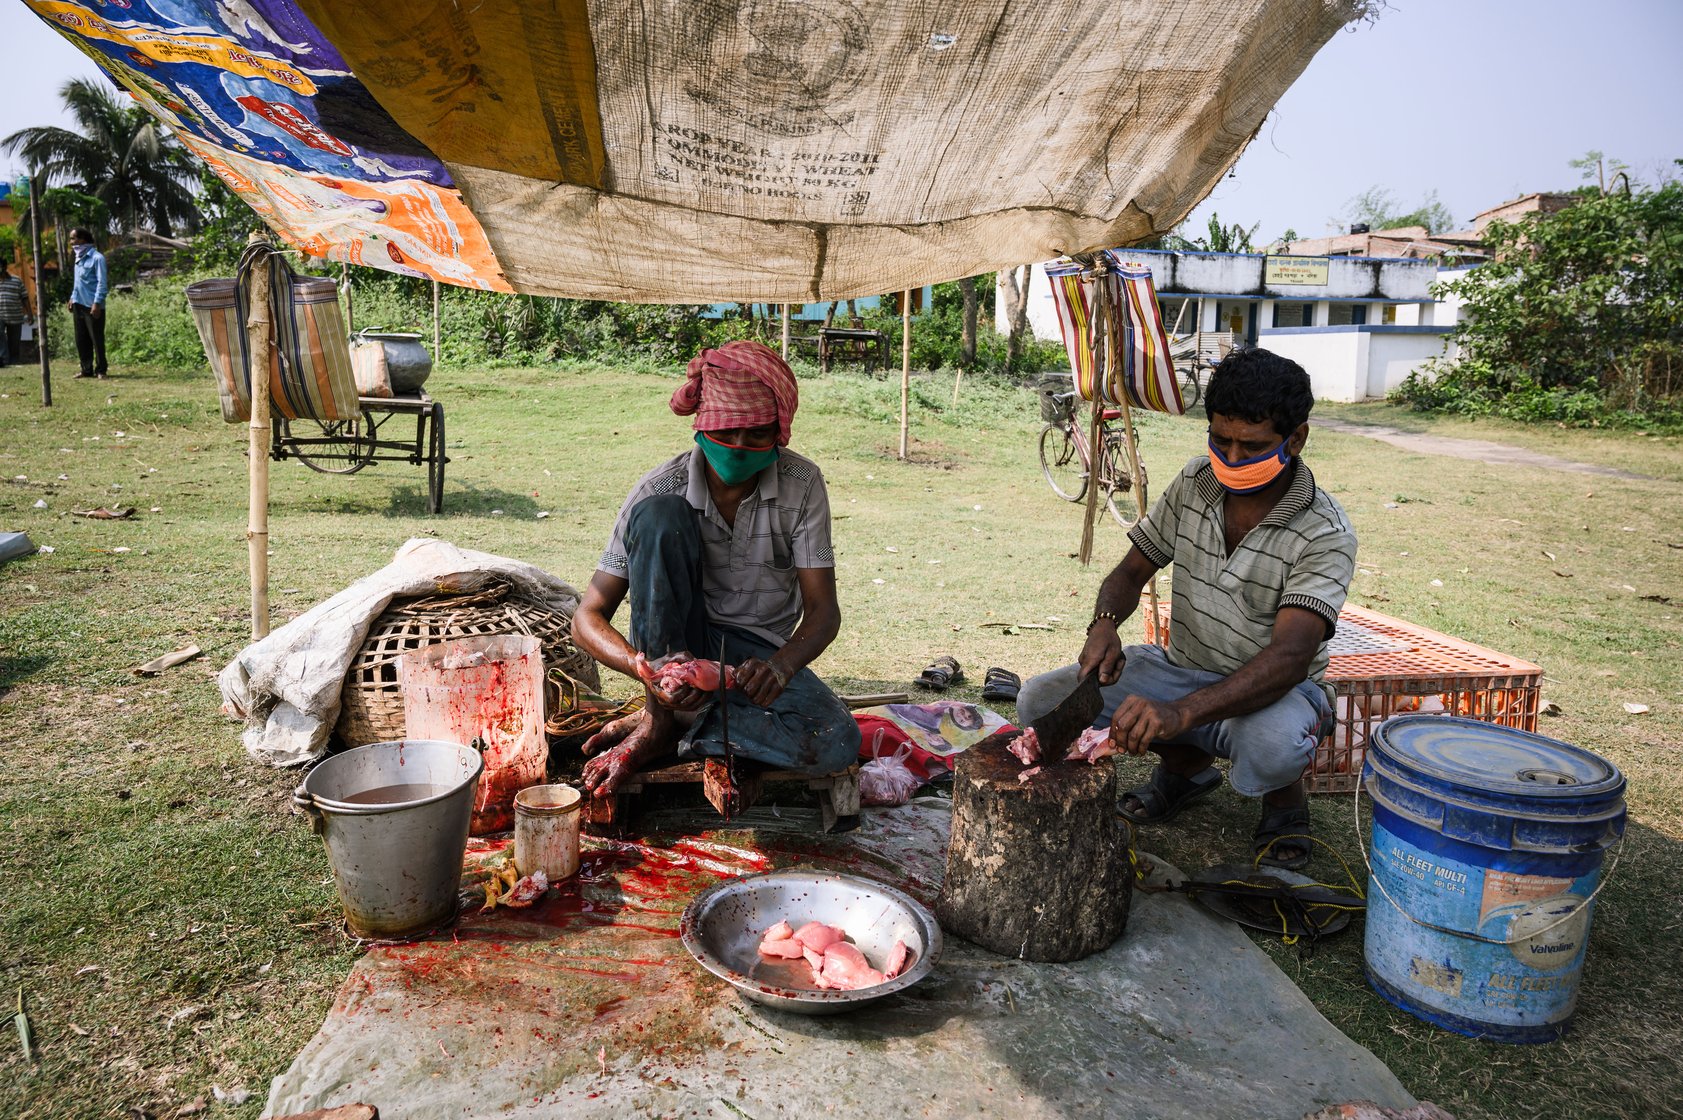 Sukhen (left) and Prosenjit Halder (right) are brothers. Sukhen used to cook in a restaurant, earning Rs. 10,000 a month, but now barely makes Rs. 200 a day – and that too is uncertain. Prosenjit worked at a fish farm and as a part-time mason's helper. His earnings were more modest – around Rs. 250 a day from both sources – but he got to take some fish home from the fish farm. That too has stopped during the lockdown.

